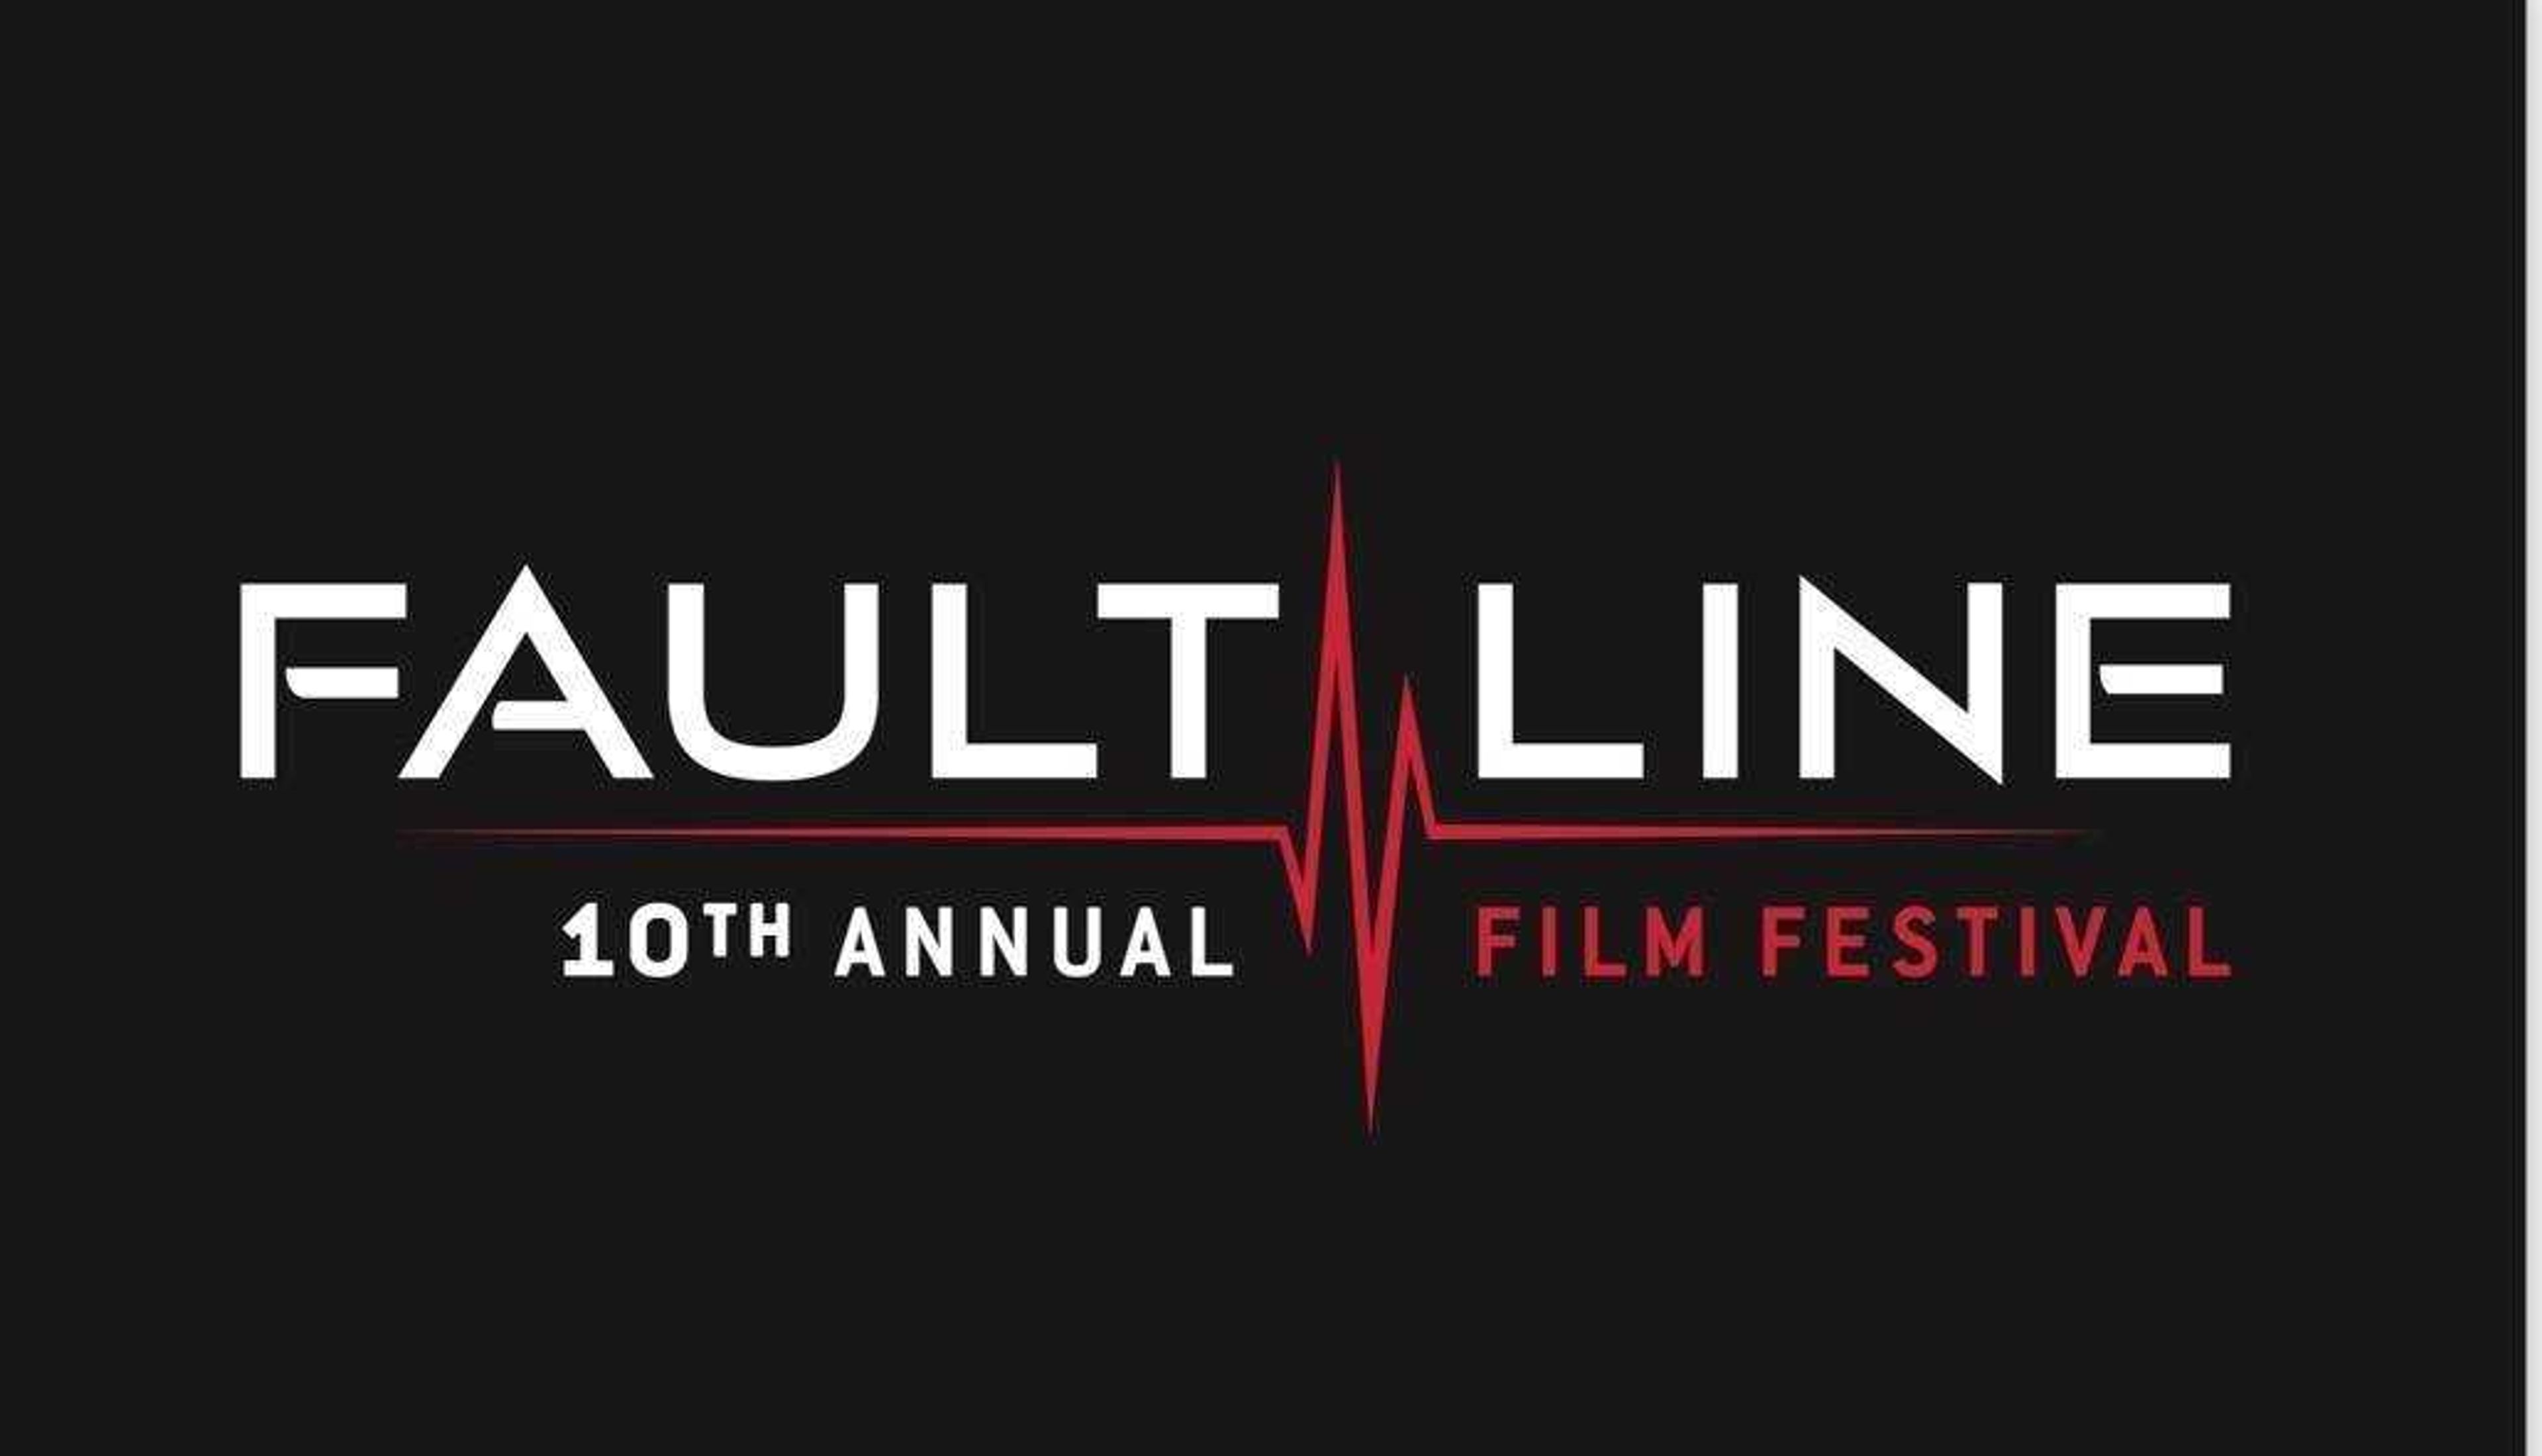 Fault Line Film Festival logo created by Red Letter Communications.